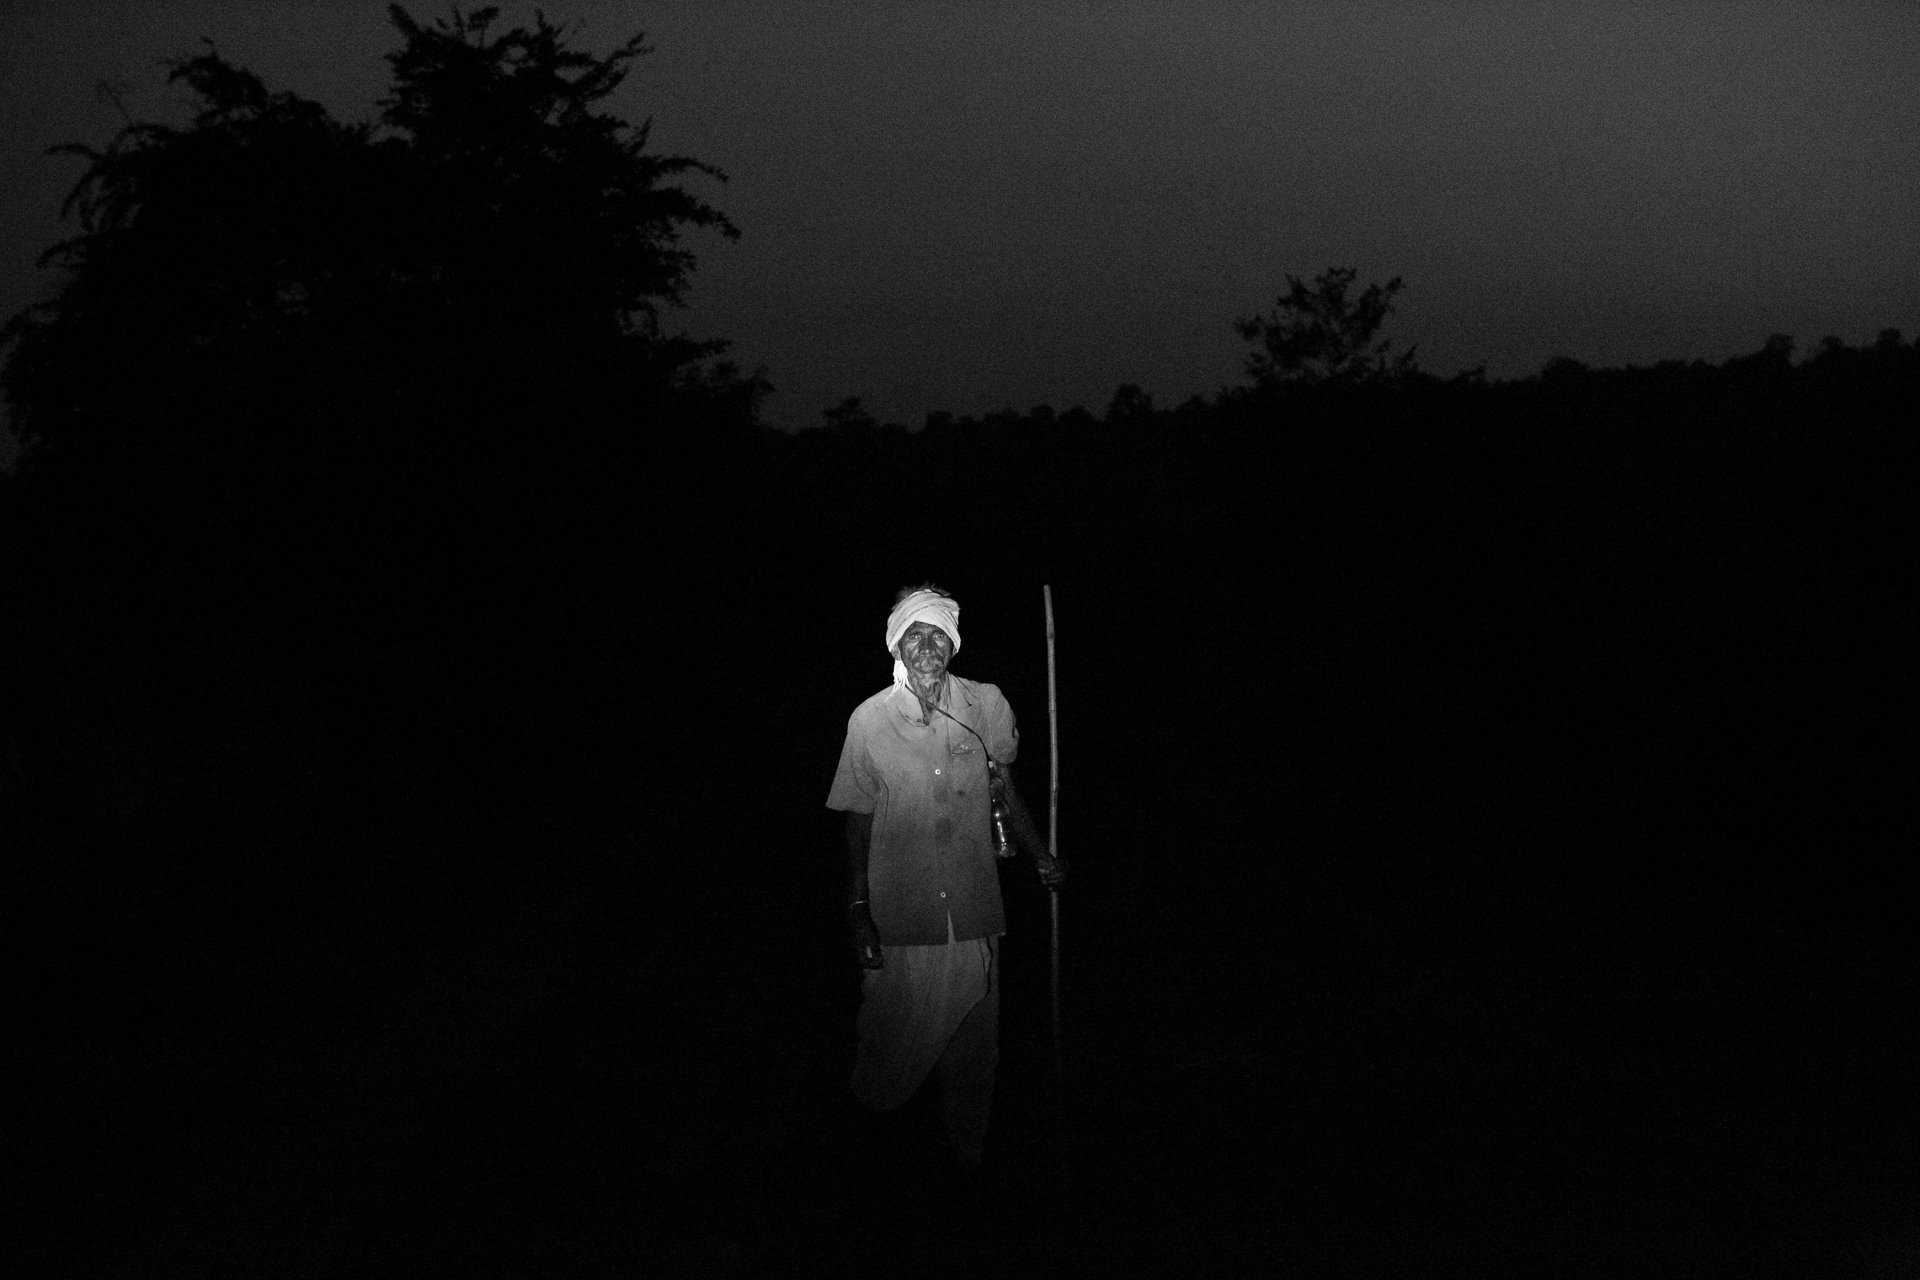 <p>A night watchman protects farmland and livestock from tigers and other big cats in a village in Chandrapur, Maharashtra, India. Around 200 tigers live in Chandrapur, of which around 80 share the space outside the core zone of the Tadoba Andhari Tiger Reserve.</p>
